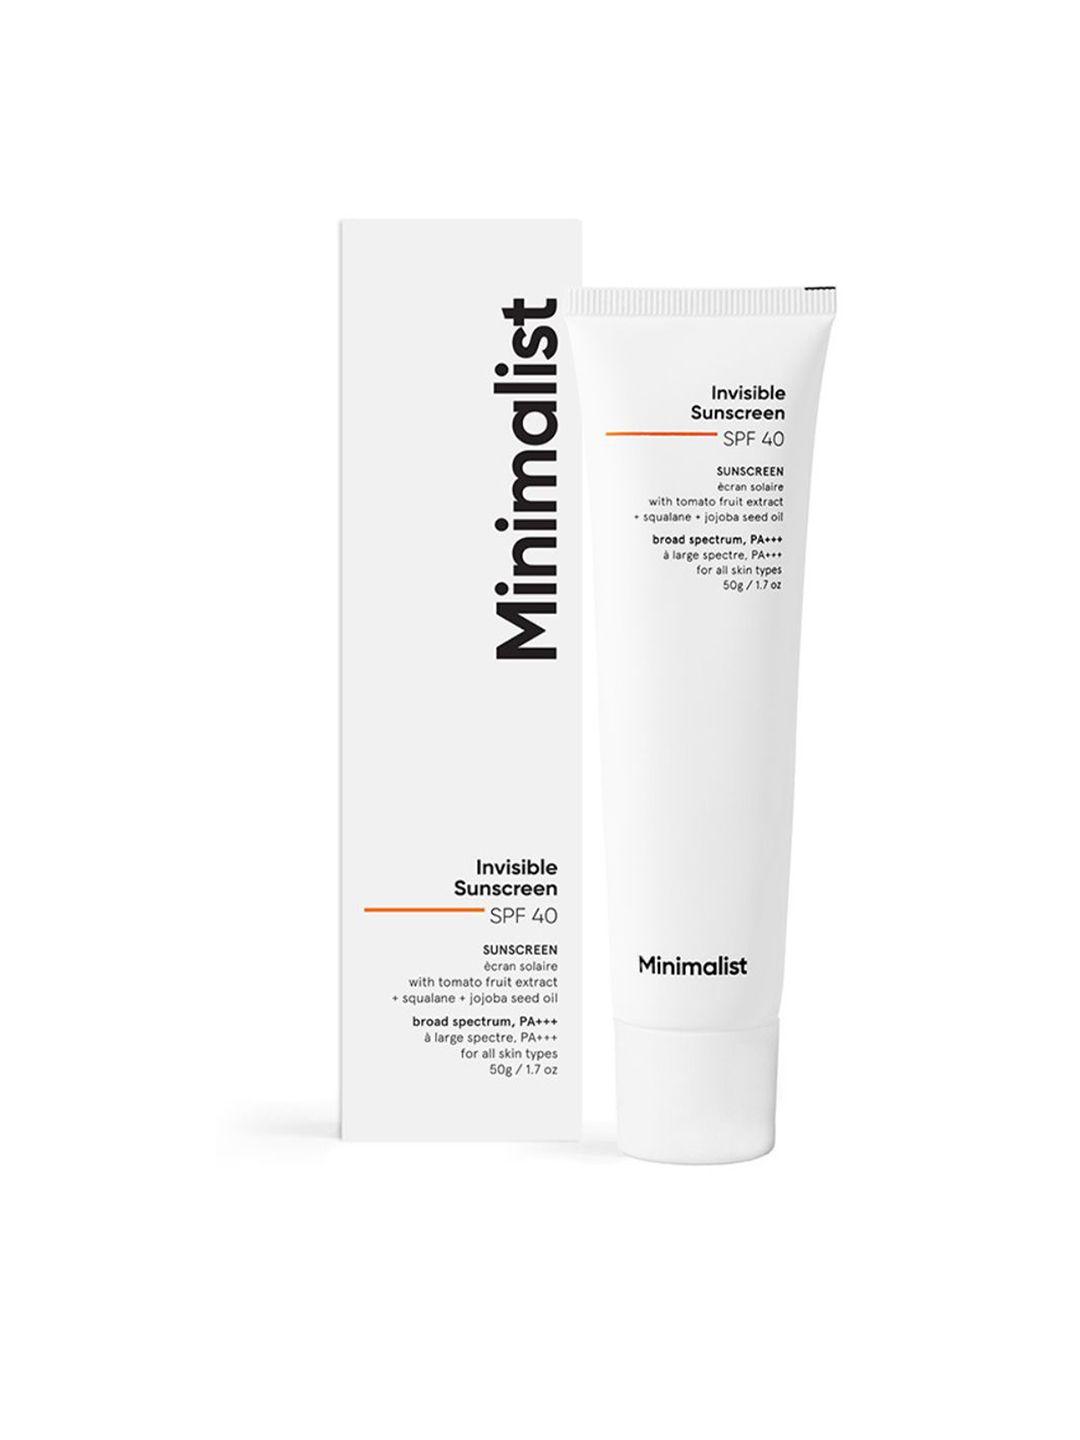 minimalist-invisible-sunscreen-with-tomato-fruit-extract-squalene-&-jojoba-seed-oil--spf40